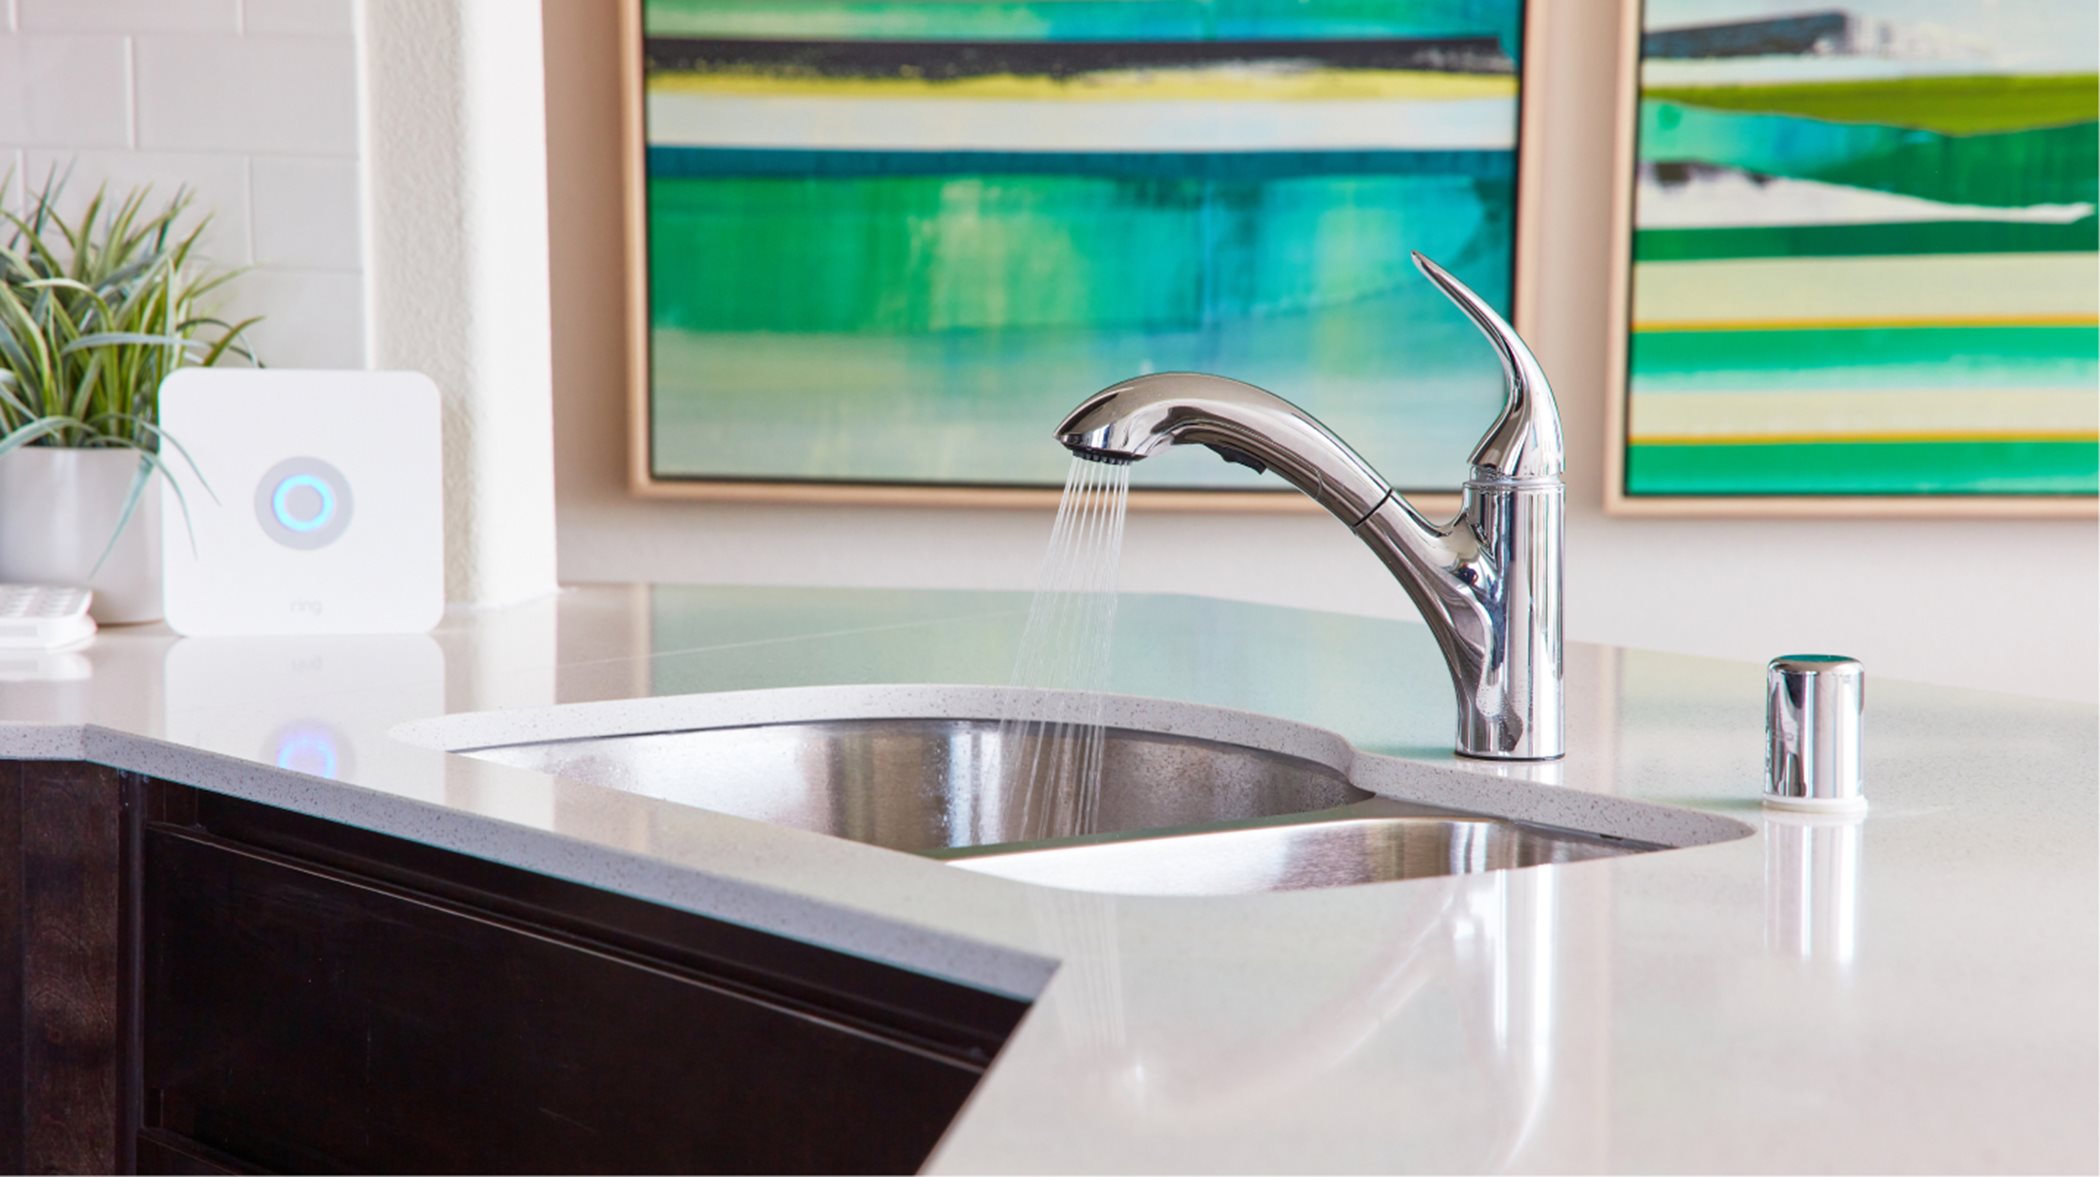 Chrome faucets and a stainless steel sink